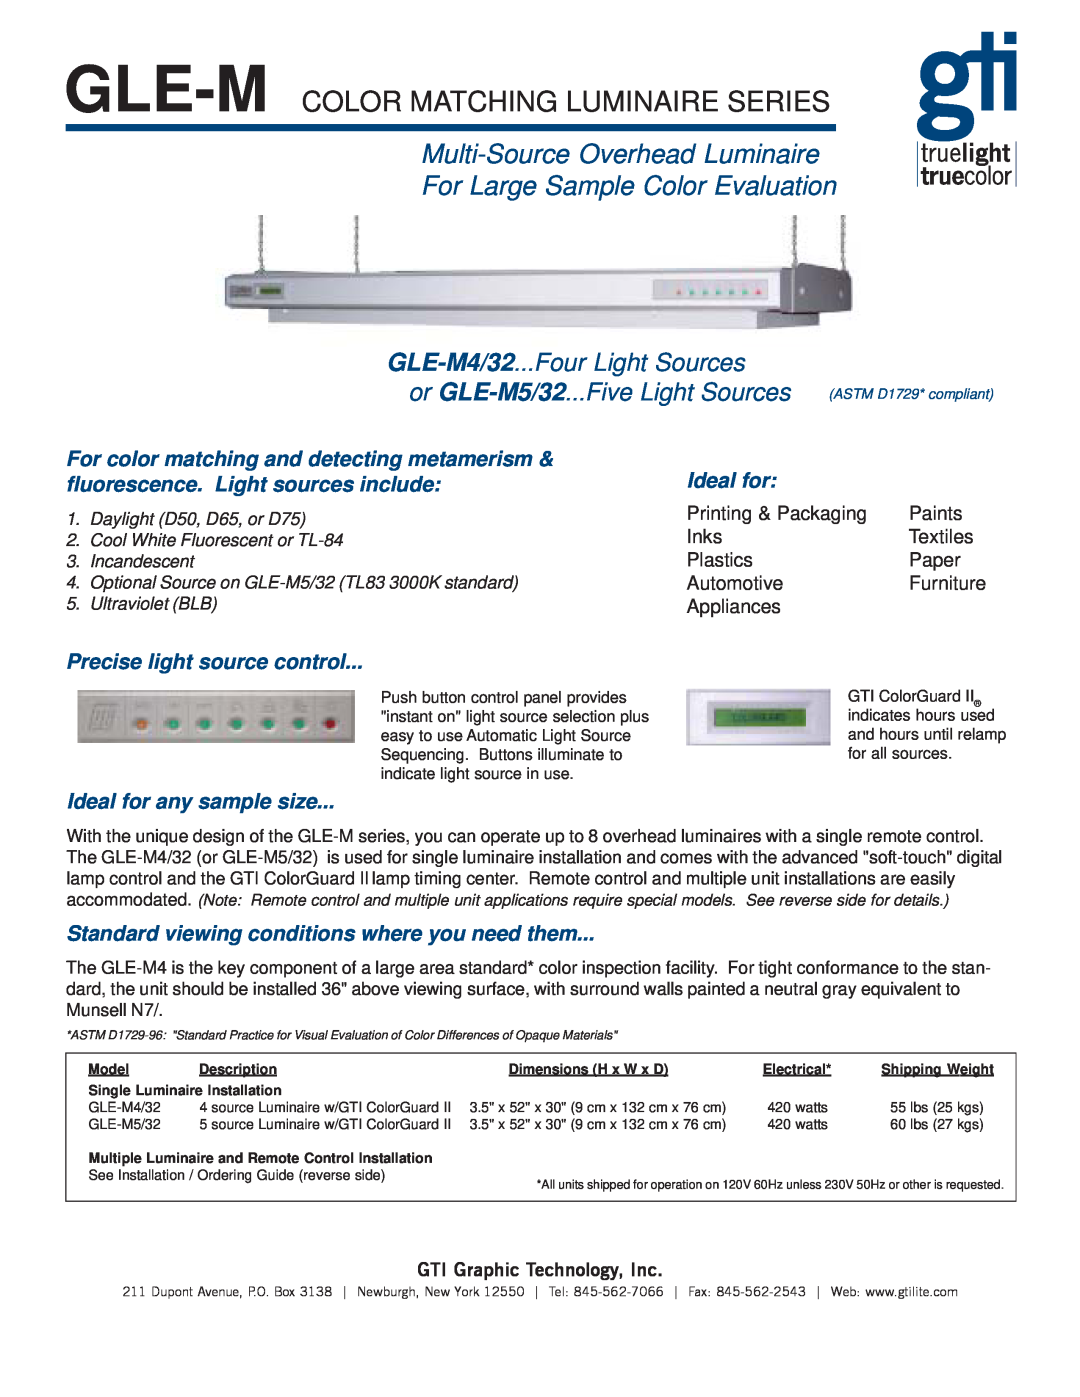 GTI GLE-M4/32 dimensions Gle-M Color Matching Luminaire Series, Multi-SourceOverhead Luminaire, Ideal for, Paints, Inks 